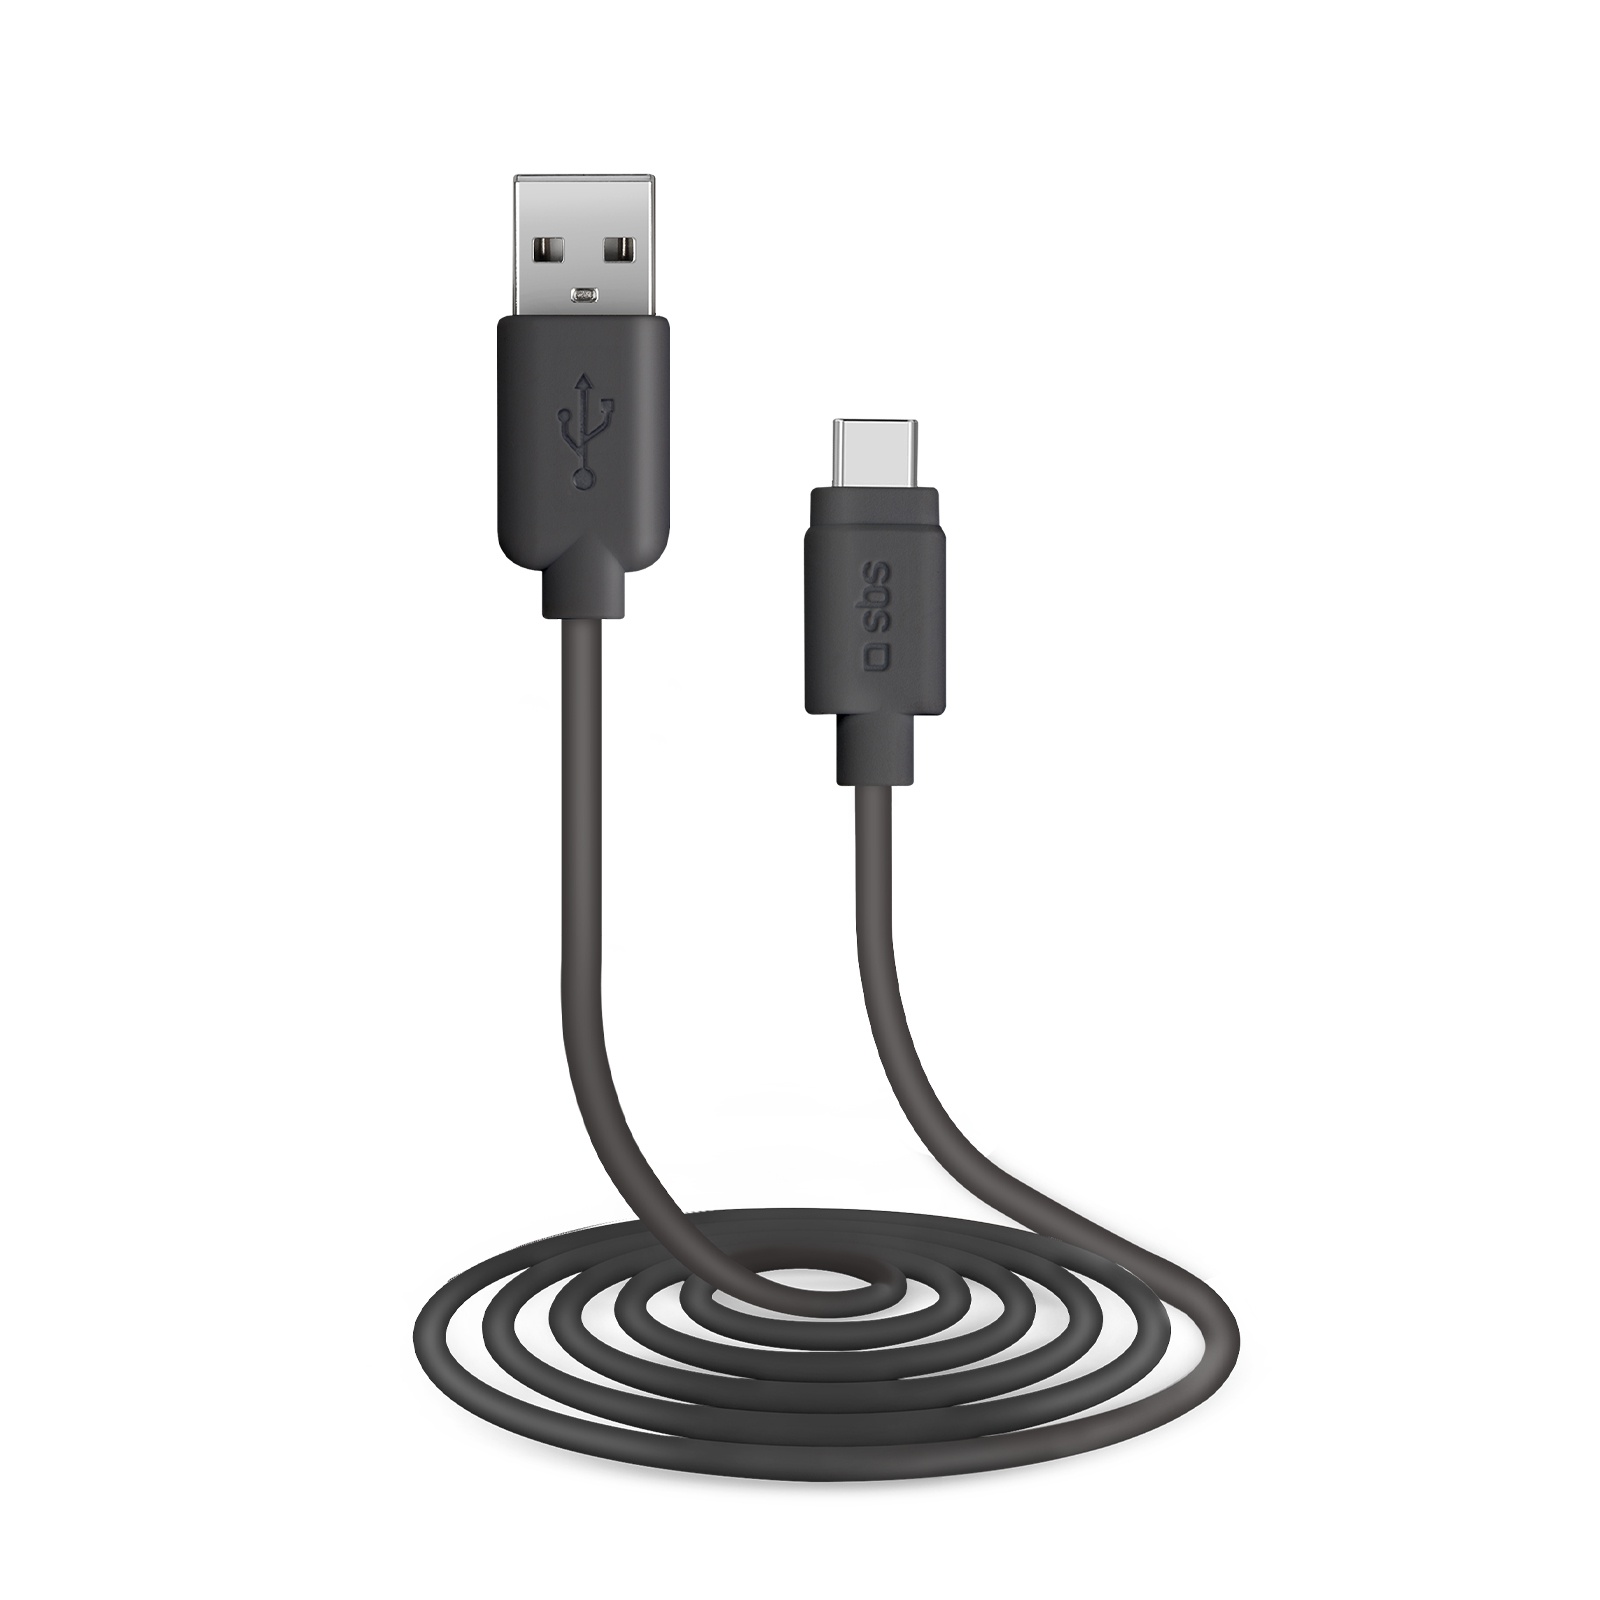 SBS USB-Type-C v 2.0 cable, metal connectors and braided cable, 1,5 m lenght, silver color